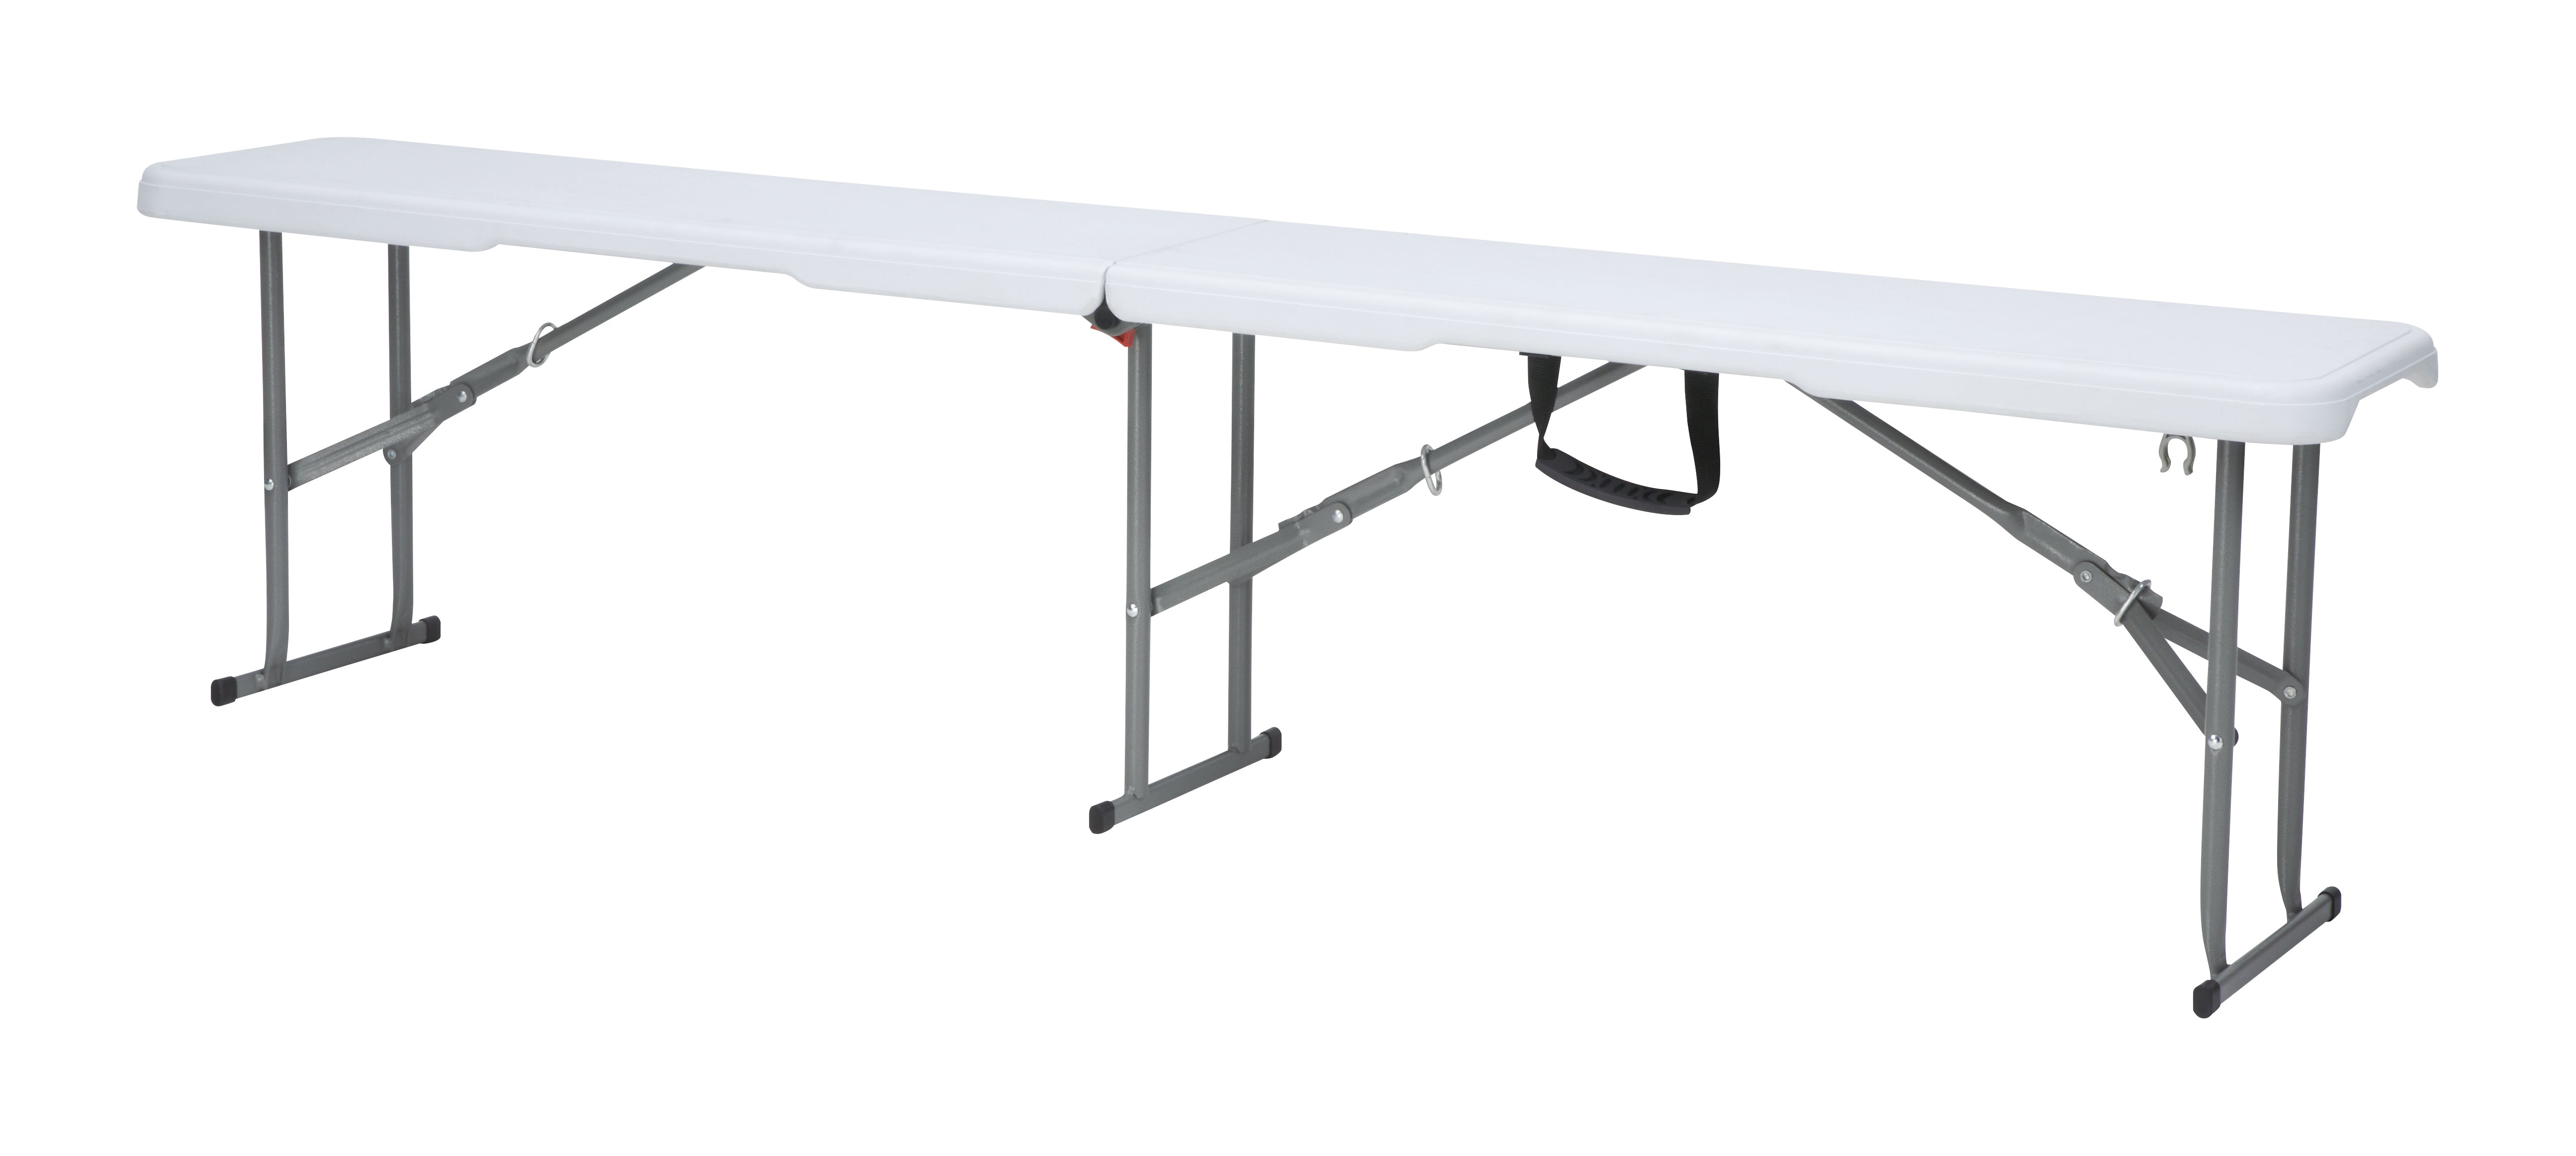 6FT Plastic Foldable Bench with Metal Legs